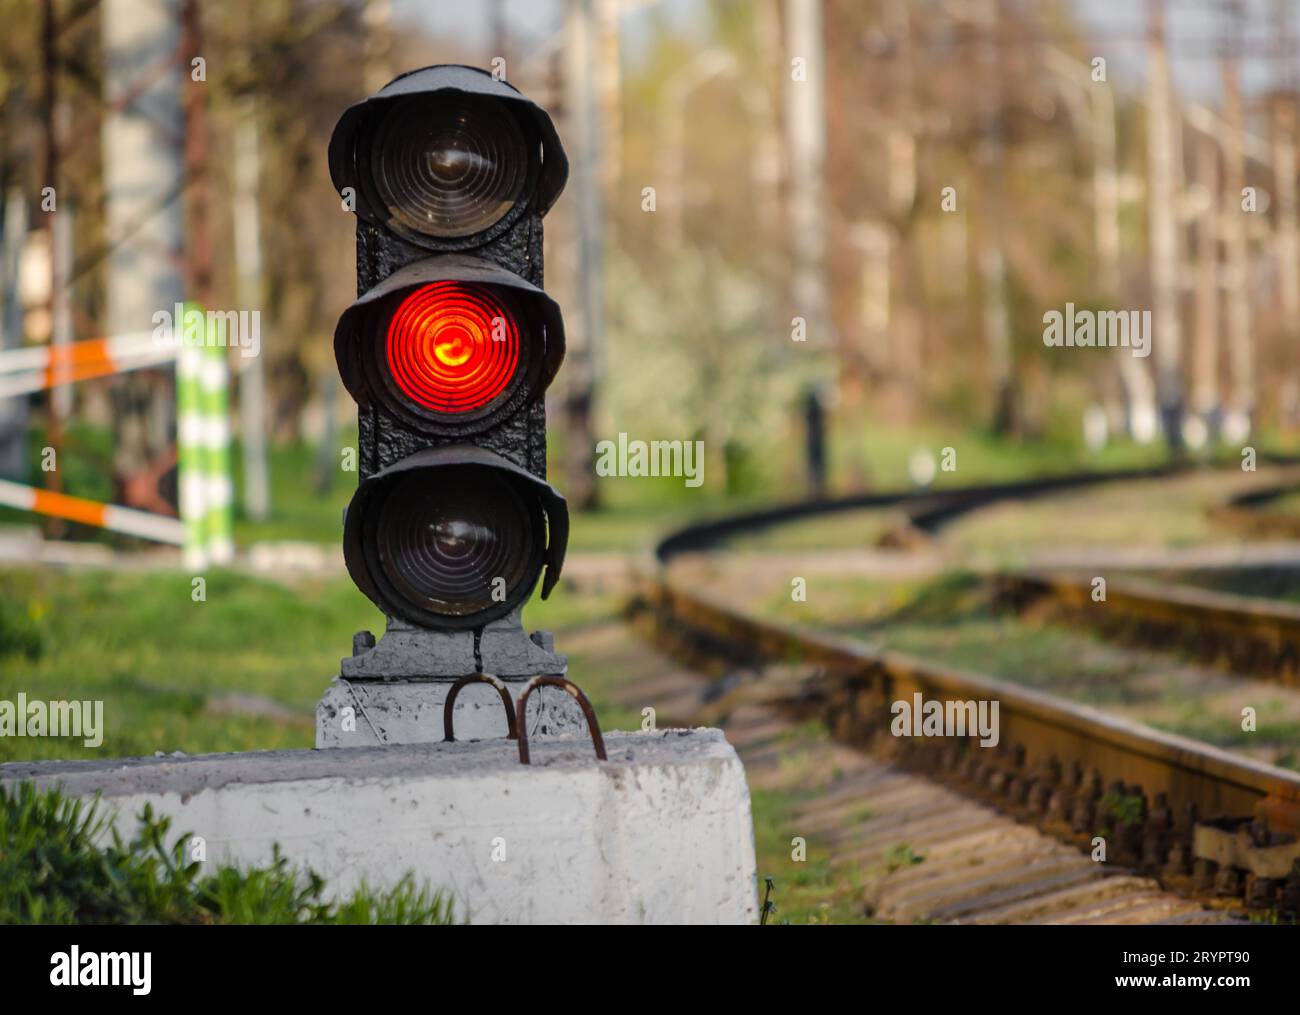 Semaphore with a red signal near the railway Stock Photo